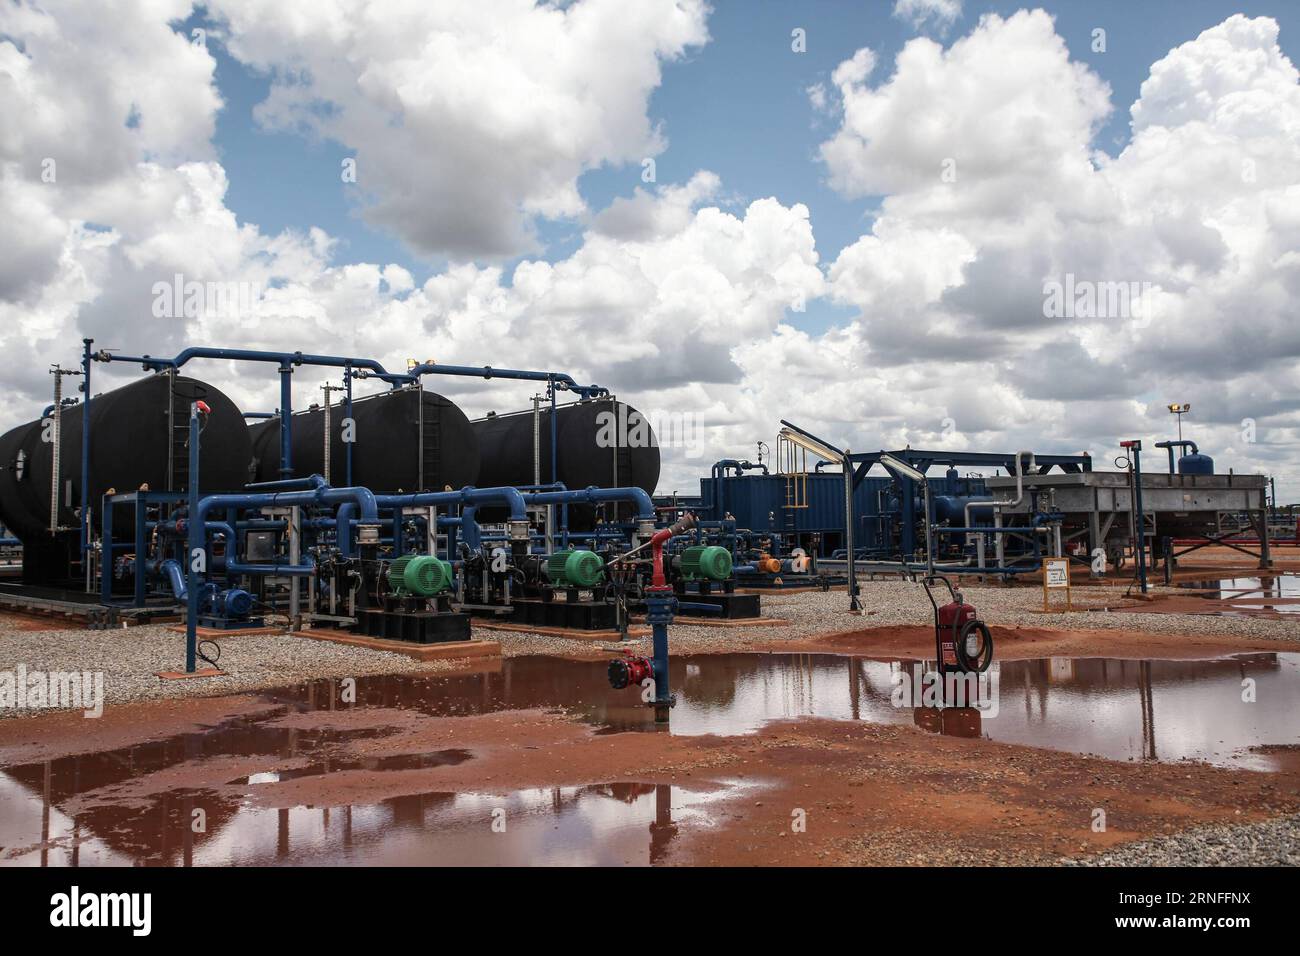 MONAGAS, Aug. 4, 2016 -- Photo taken on Aug. 4, 2016 shows the facilities of the Chinese-Venezuelan joint company SINOVENSA S.A. in the Orinoco Petroleum Belt in Monagas state, Venezuela. State-run oil companies of Venezuela and China are joining hands to boost oil output from the Orinoco oil belt in southeastern Venezuela, which boasts one of the world s largest oil reserves. ) (syq) VENEZUELA-MONAGAS-CHINA-OIL BorisxVergara PUBLICATIONxNOTxINxCHN   Monagas Aug 4 2016 Photo Taken ON Aug 4 2016 Shows The Facilities of The Chinese Venezuelan Joint Company  S a in The Orinoco Petroleum Belt in M Stock Photo